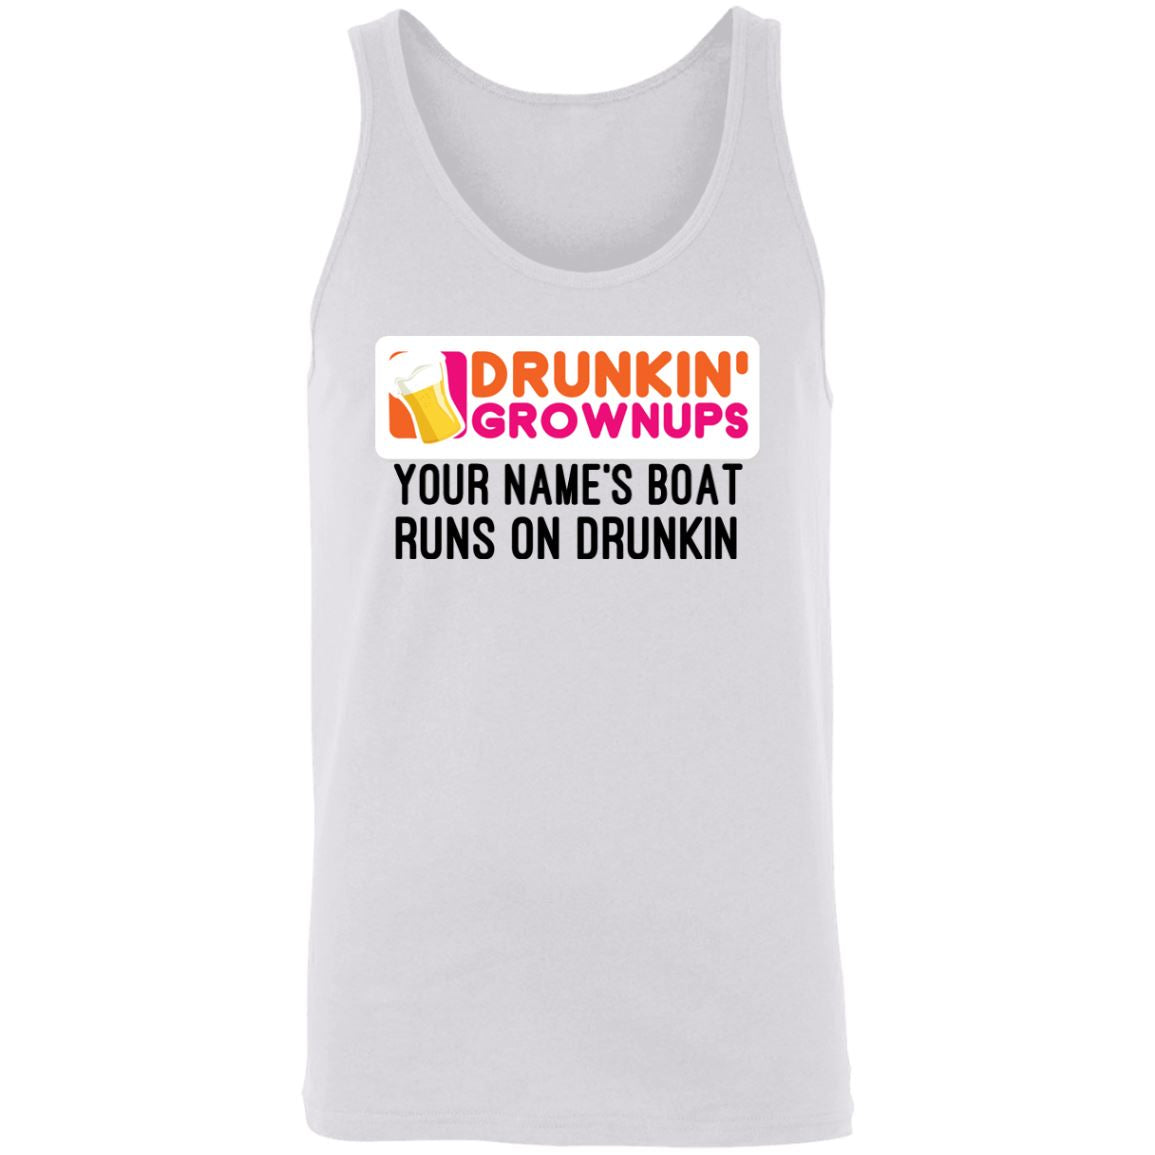 Drunkin Grownups PERSONALIZED Men's and Women's Tanks and Tee's Apparel 3480 Unisex Tank1 White X-Small